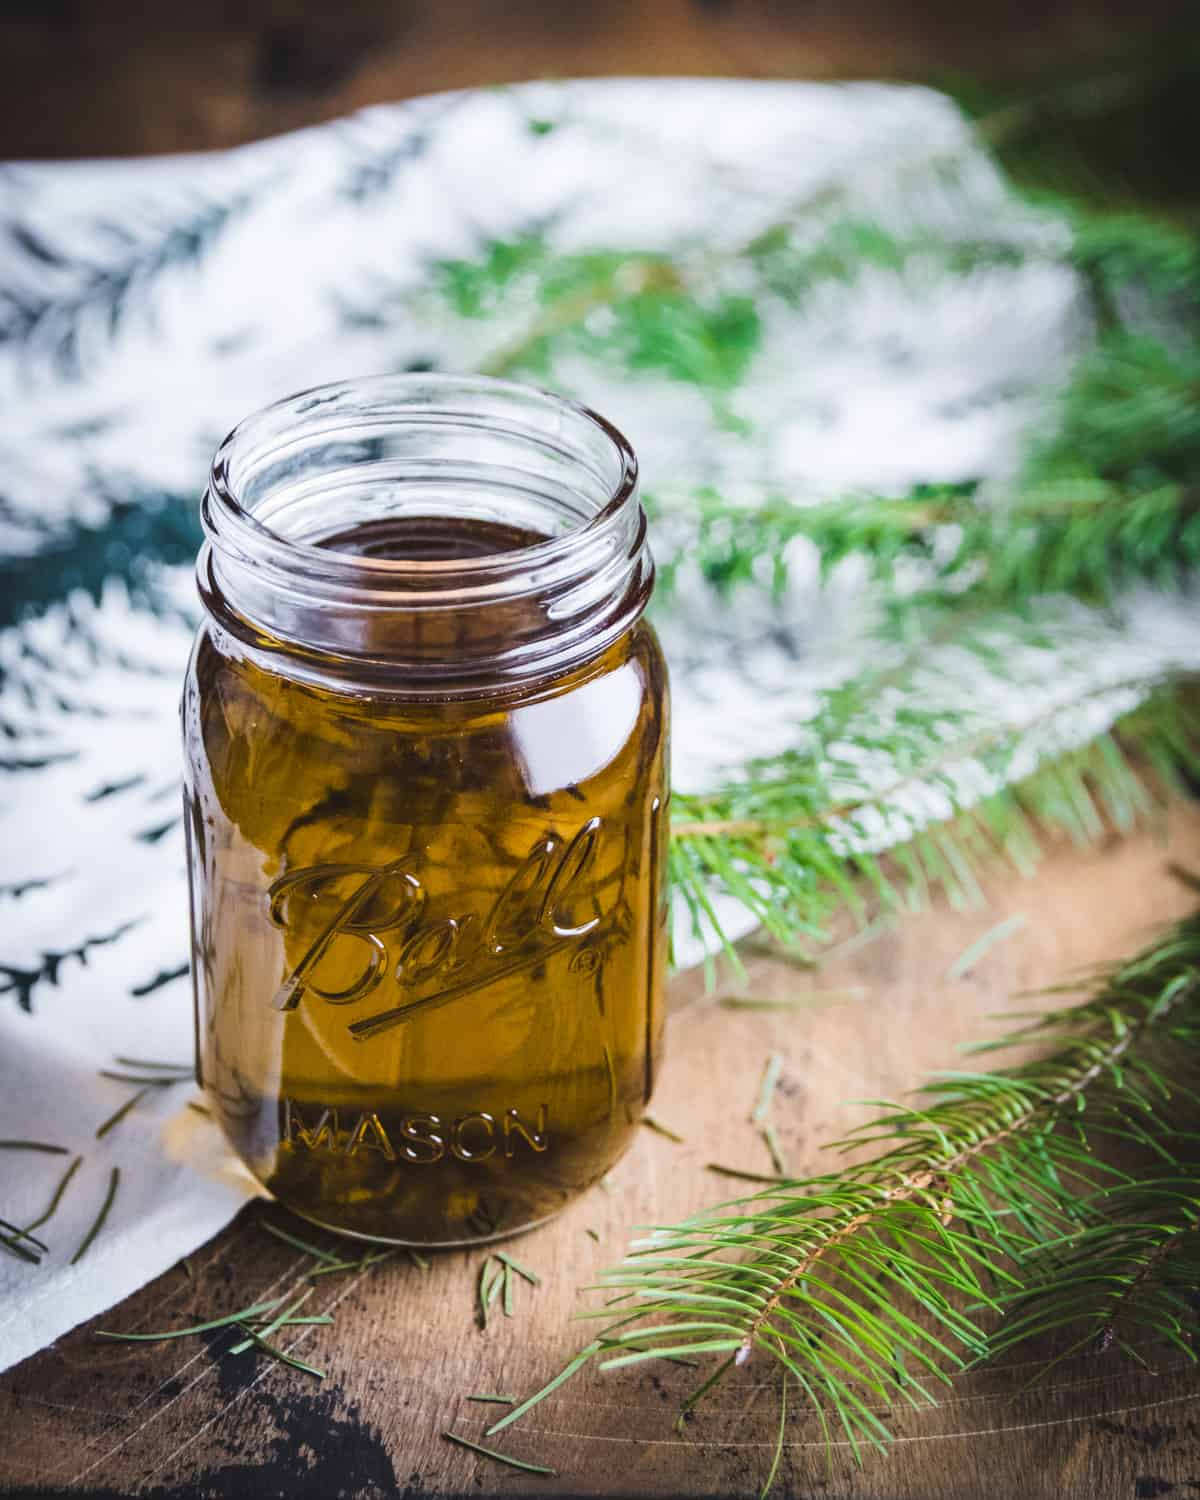 a ball jar filled with conifer infused oil